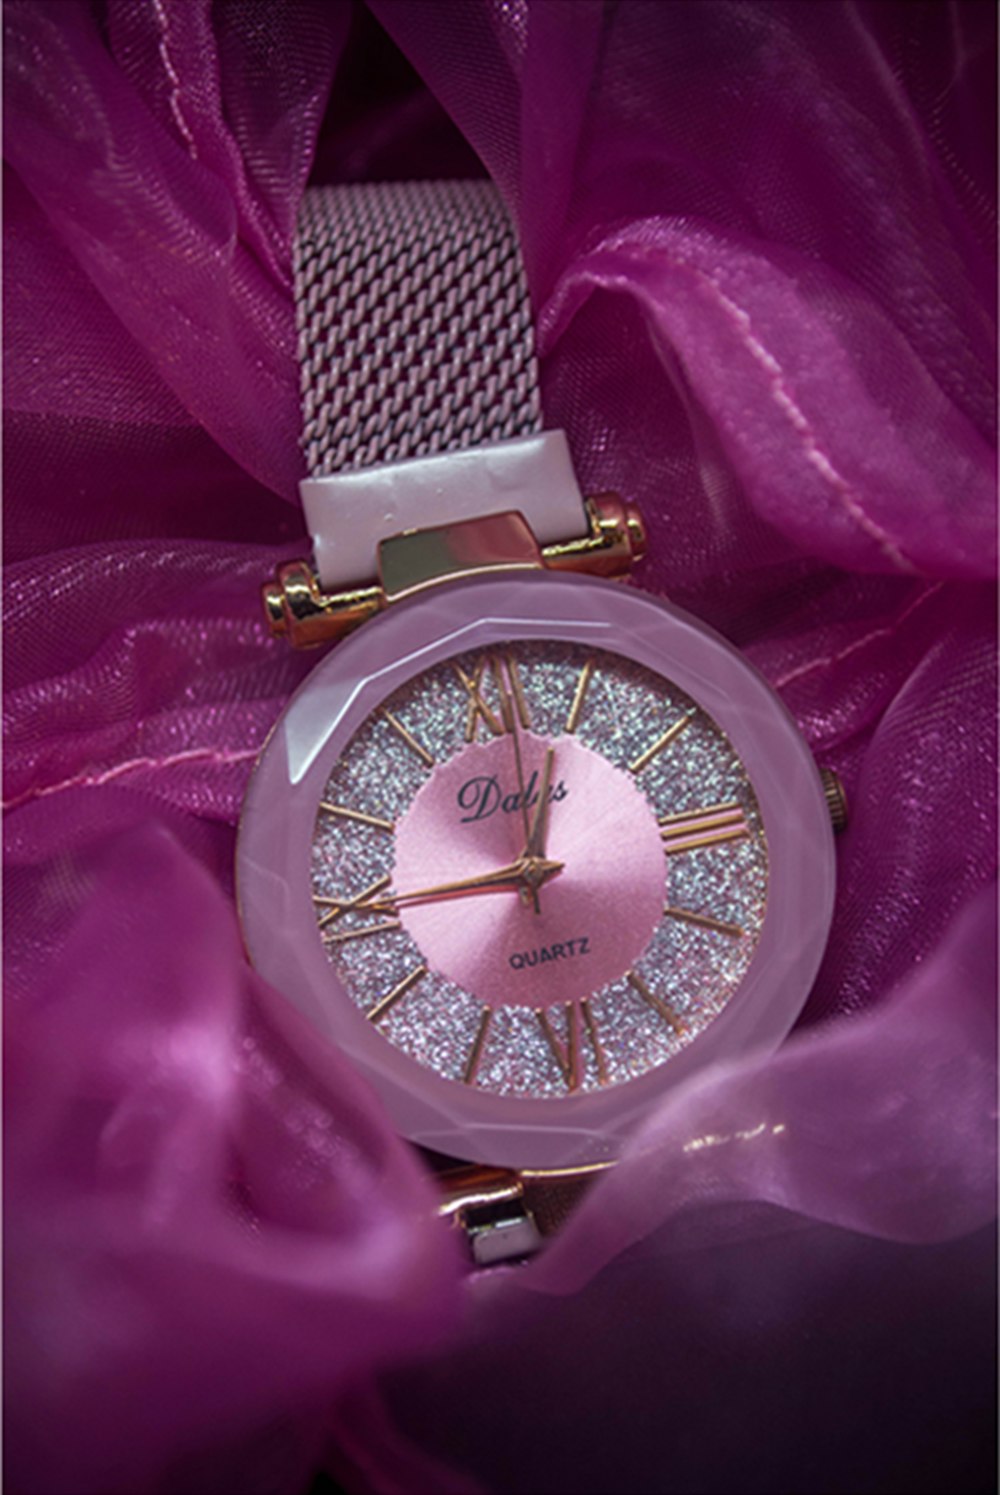 a close up of a watch on a purple cloth